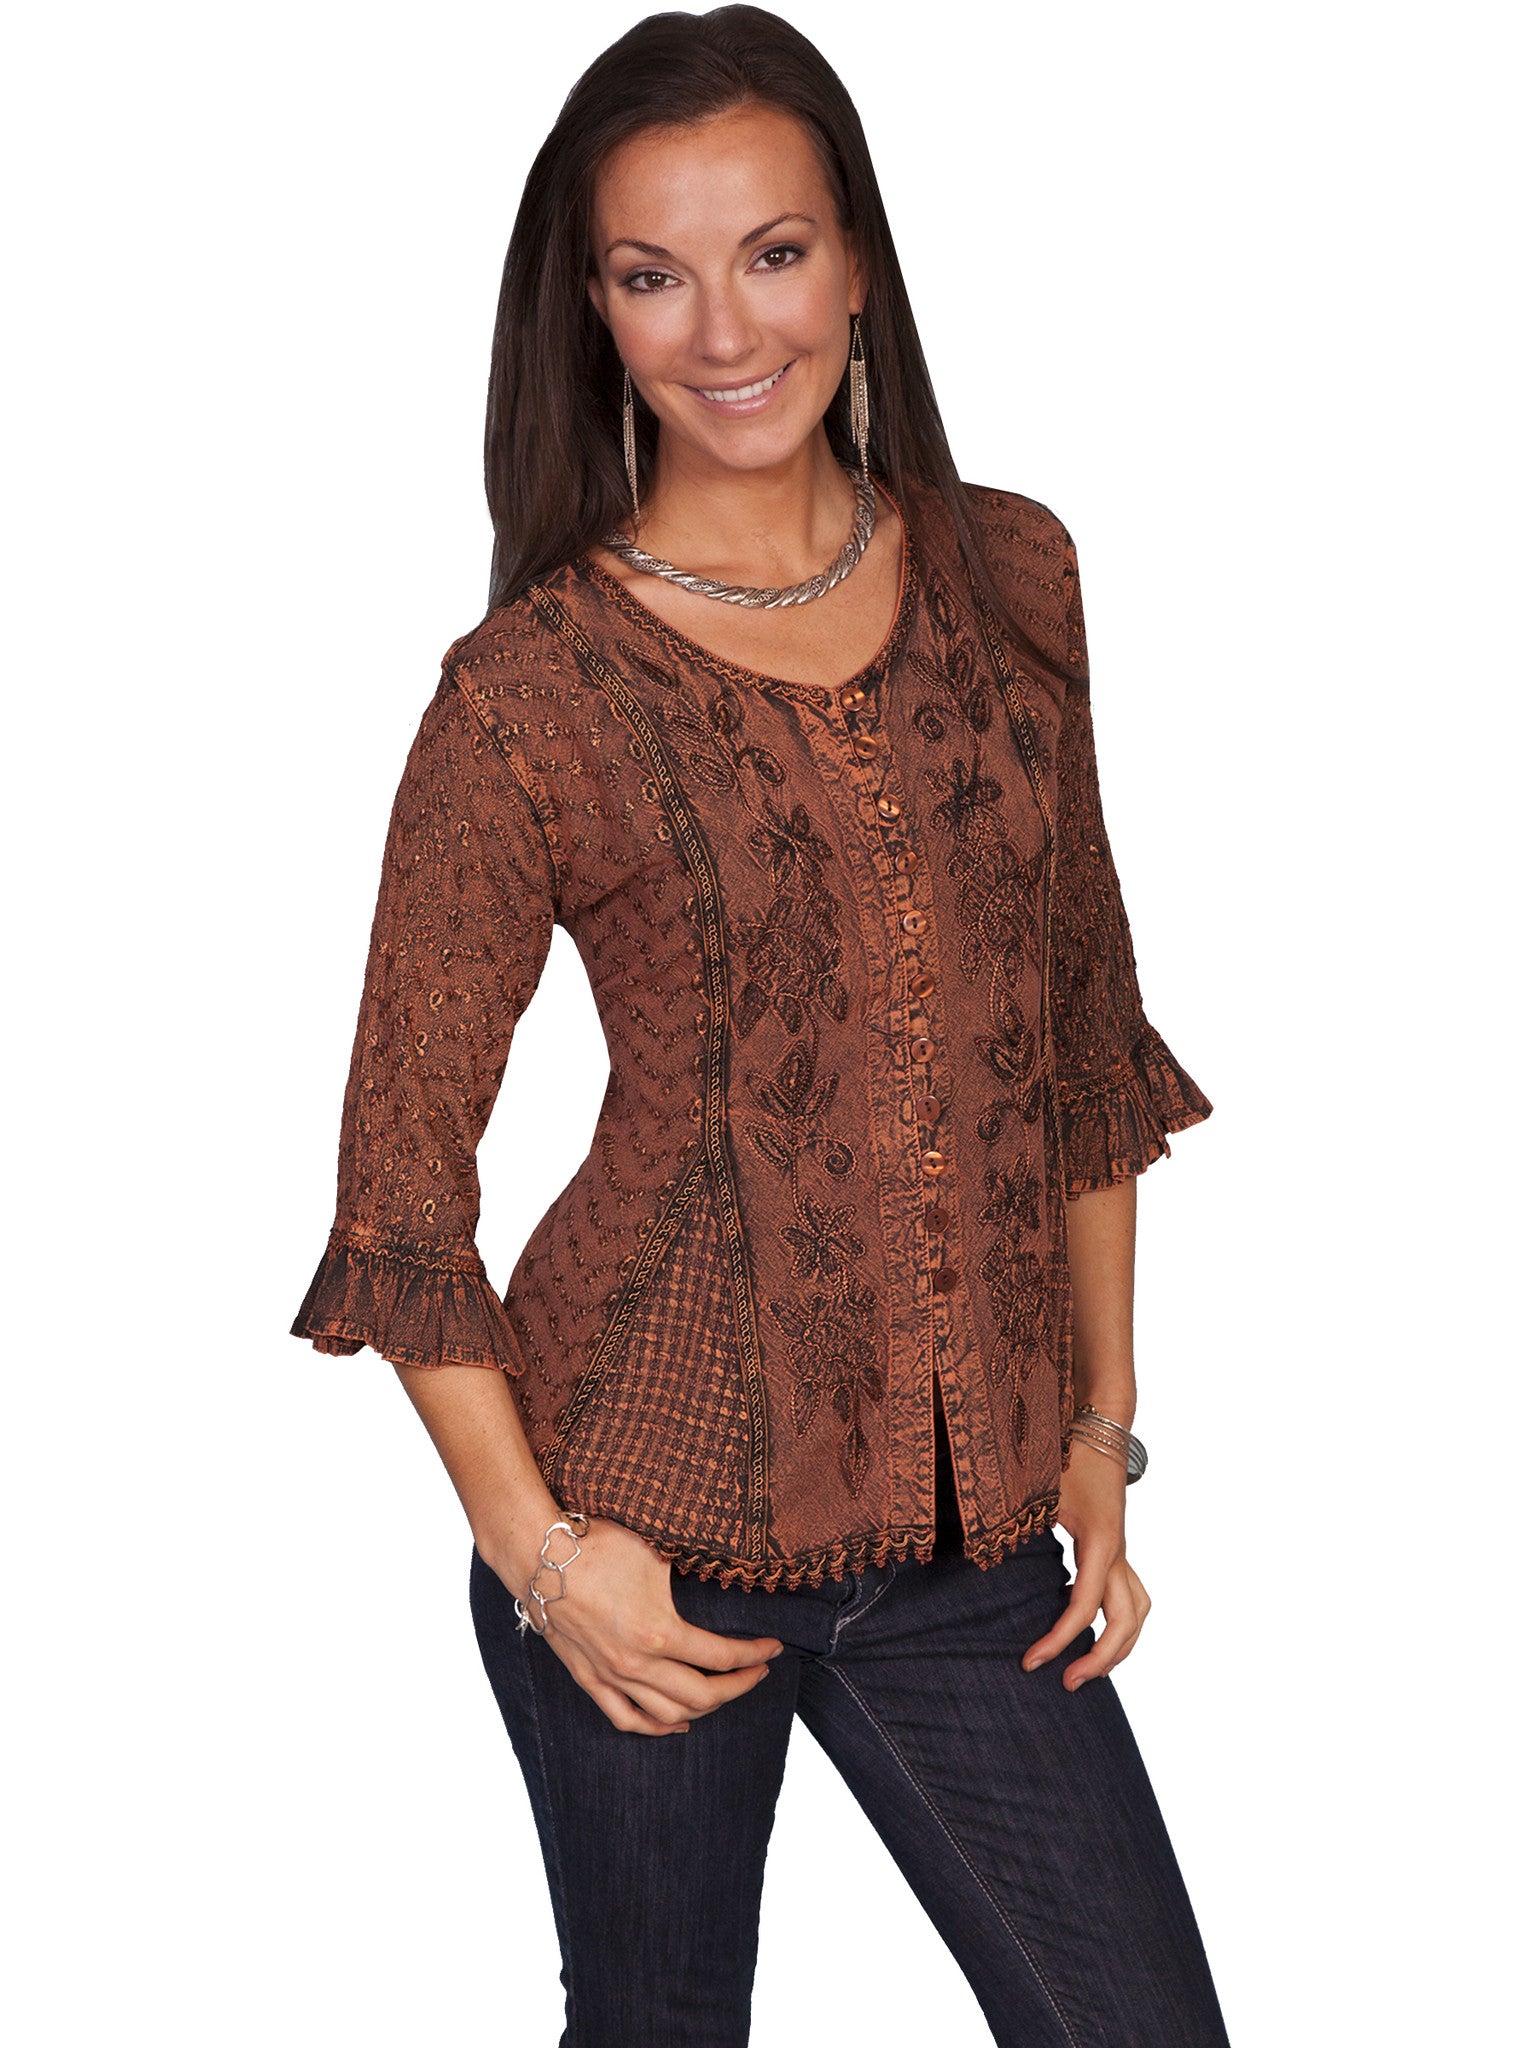 Honey Creek Top: 3/4 Sleeve Blouse, Ruffles, Embroidery, Copper S-2XL